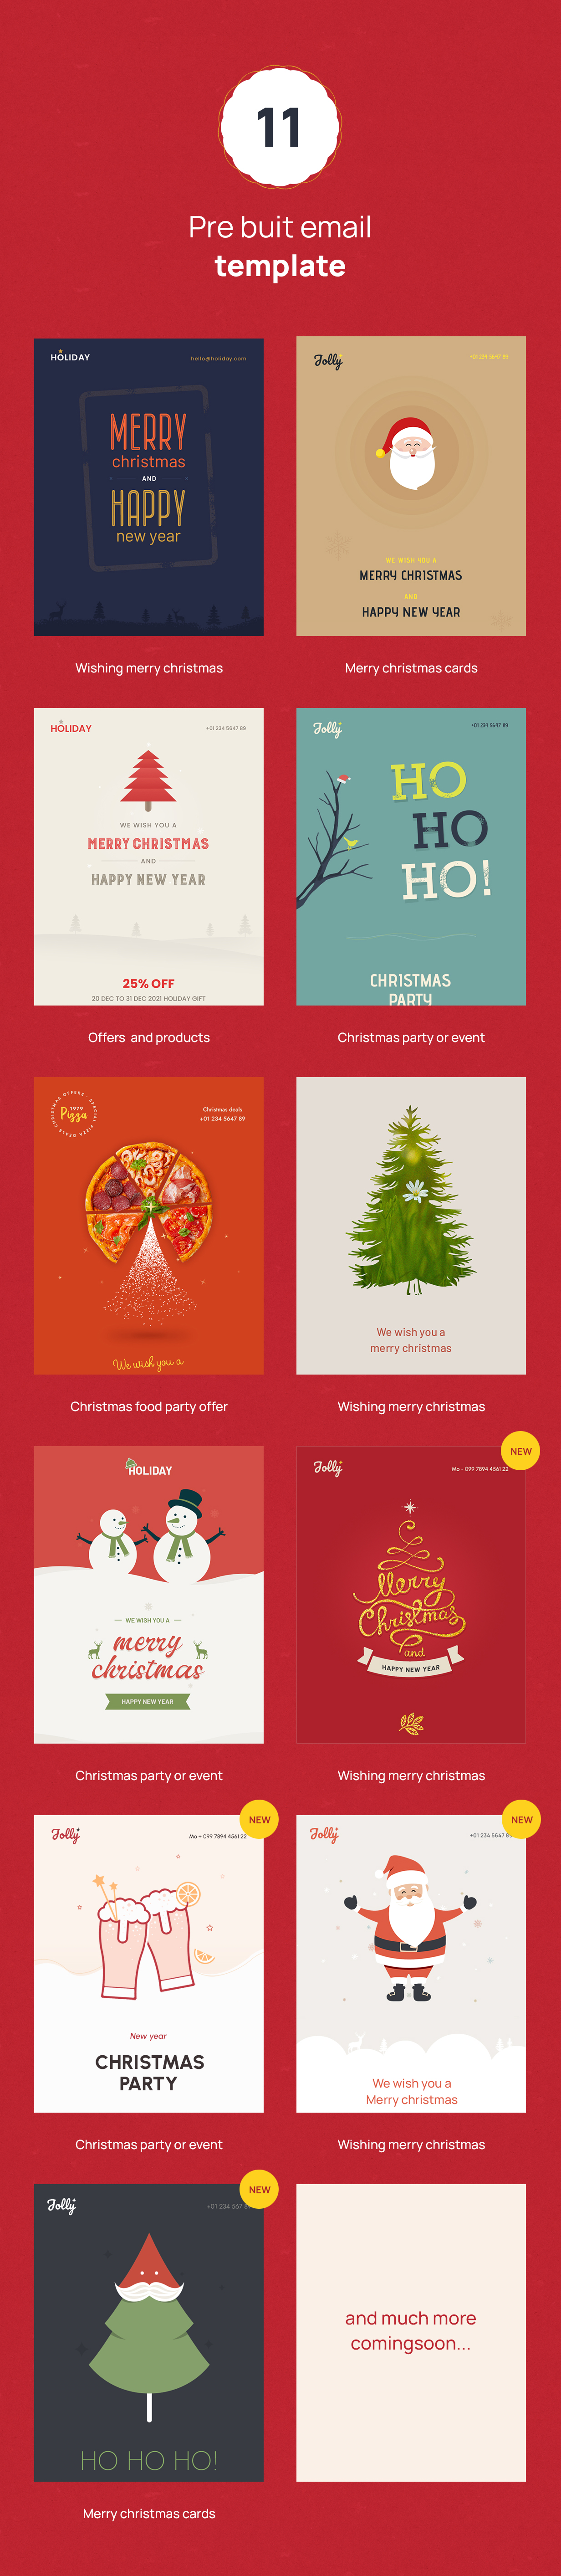 Jolly - The Christmas & New year responsive email template + Online Builder - 4